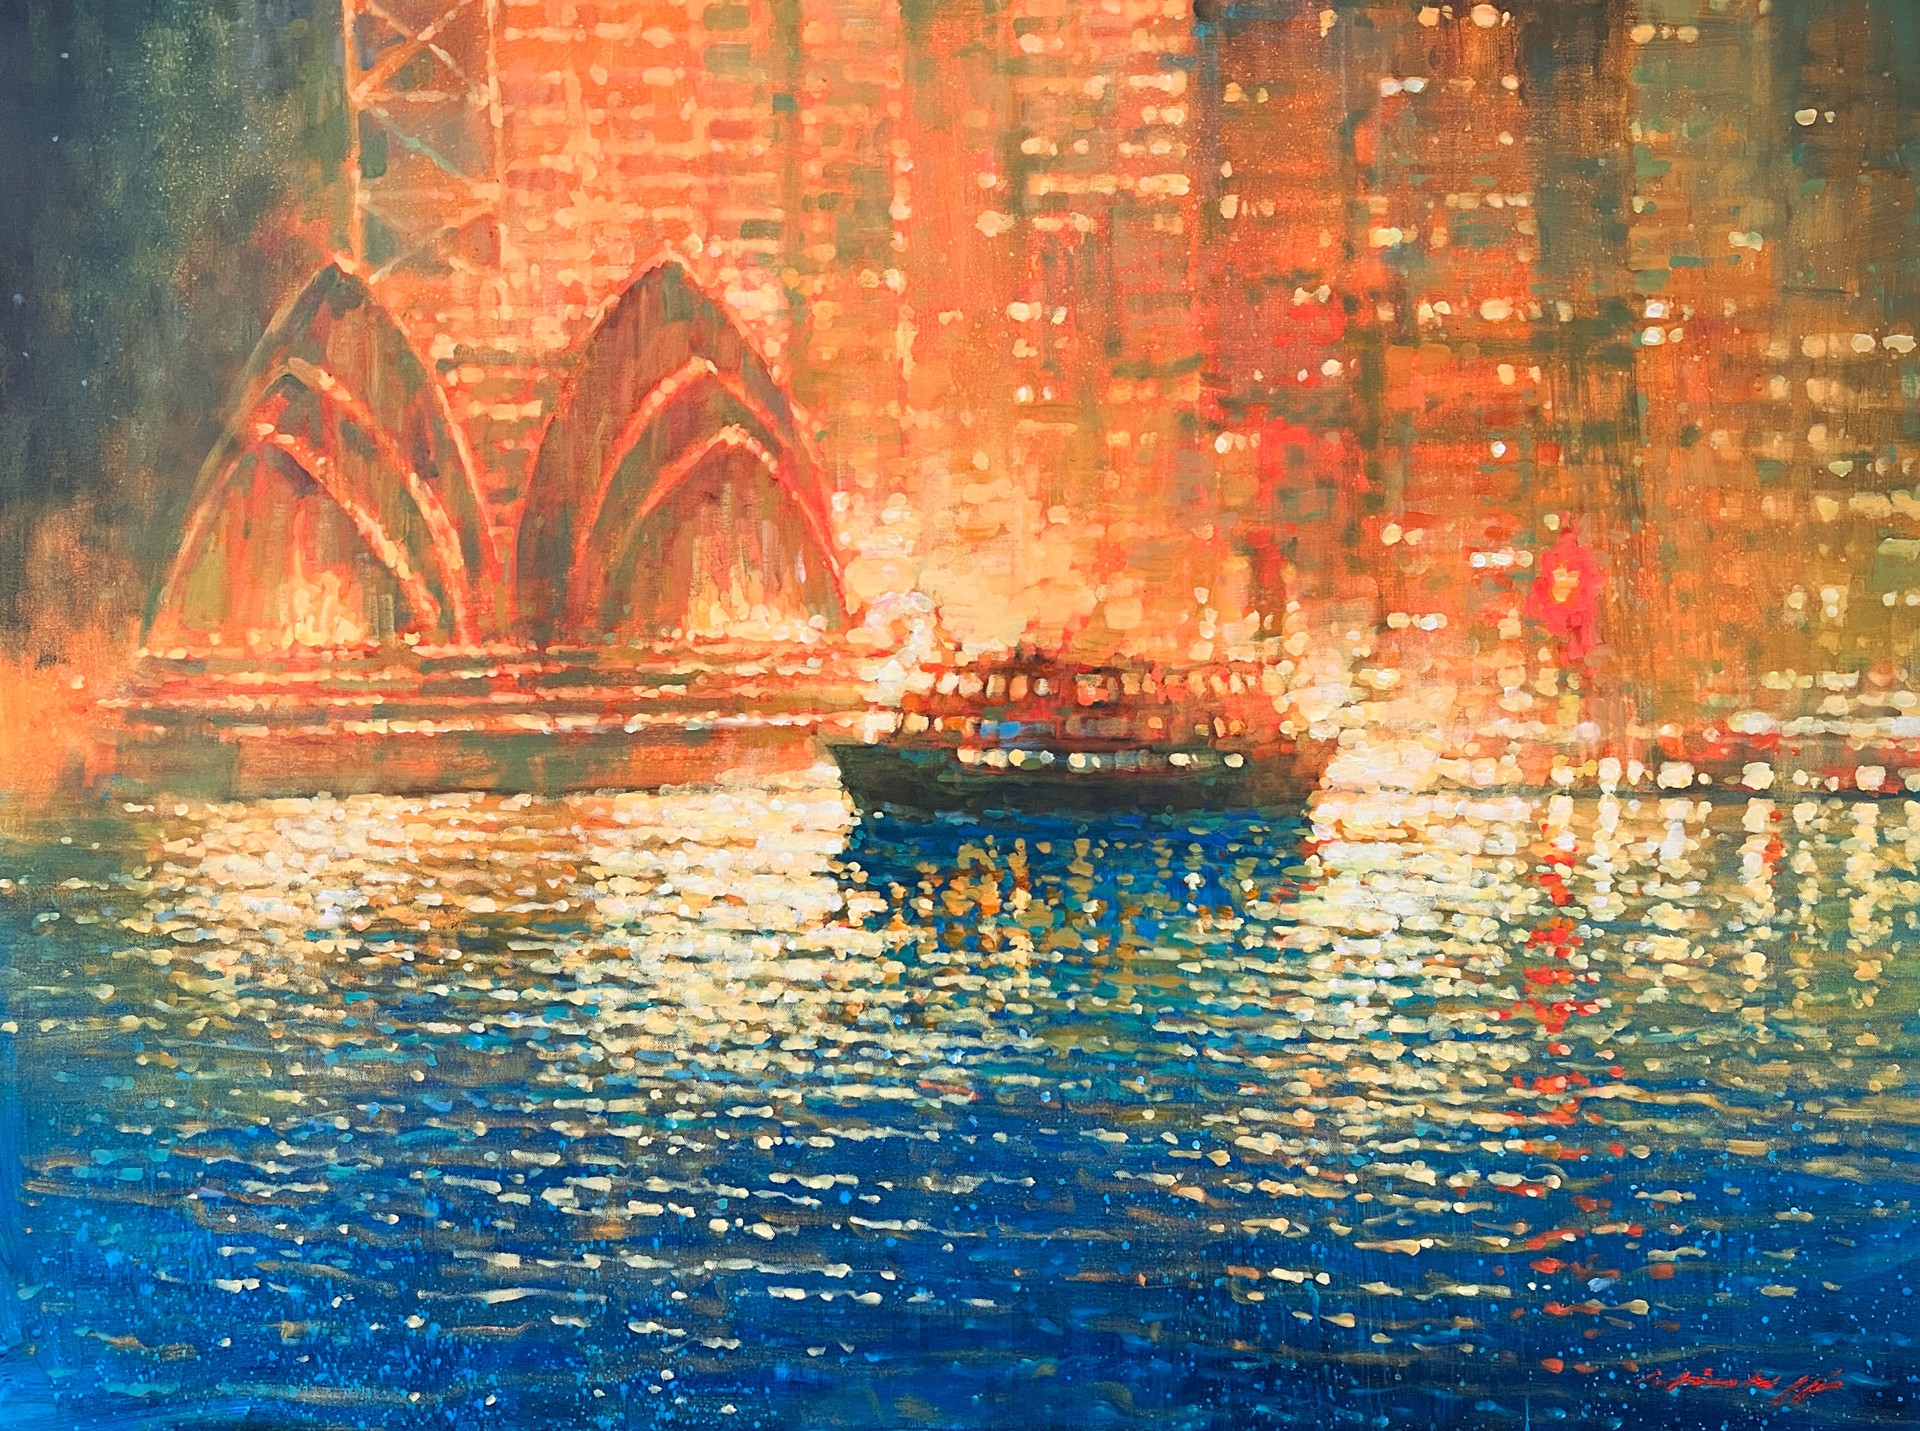 Golden Night on the Harbour by David Hinchliffe